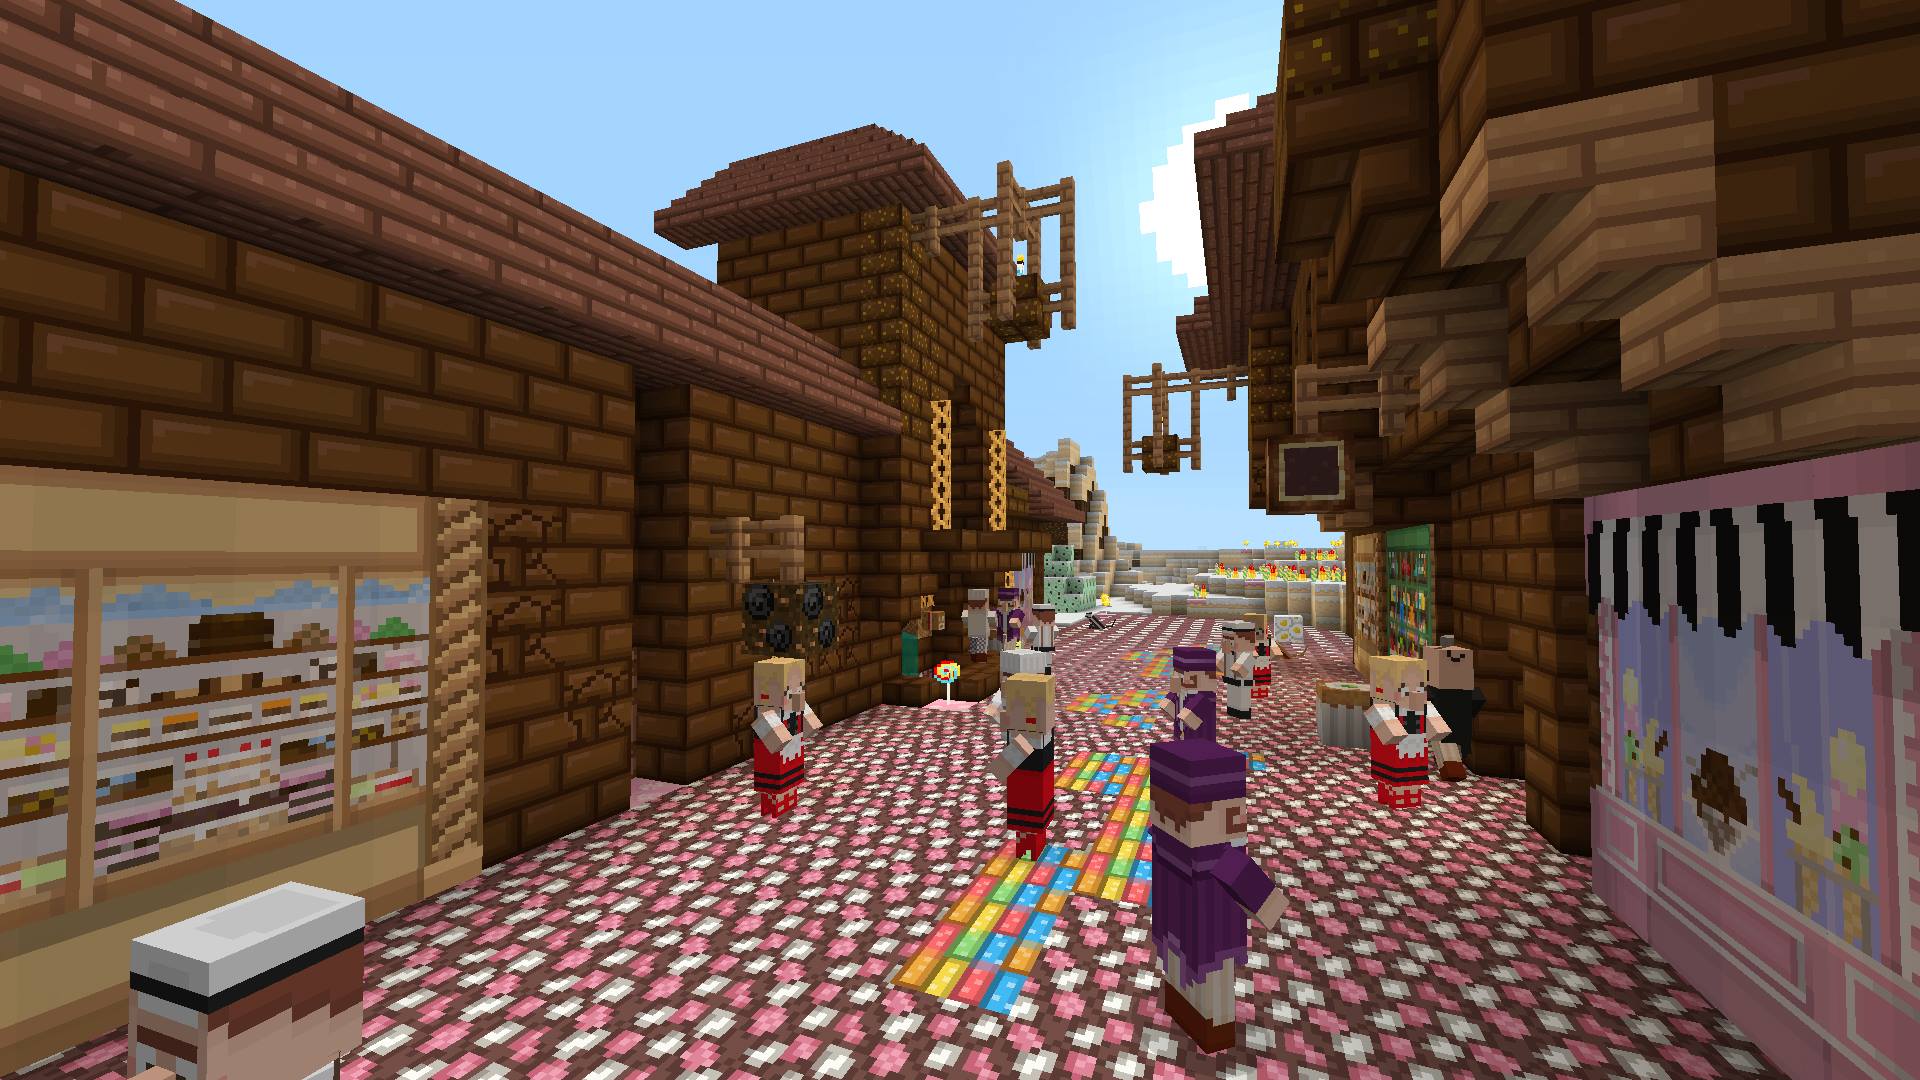 minecraft candy texture pack free 1.12 download